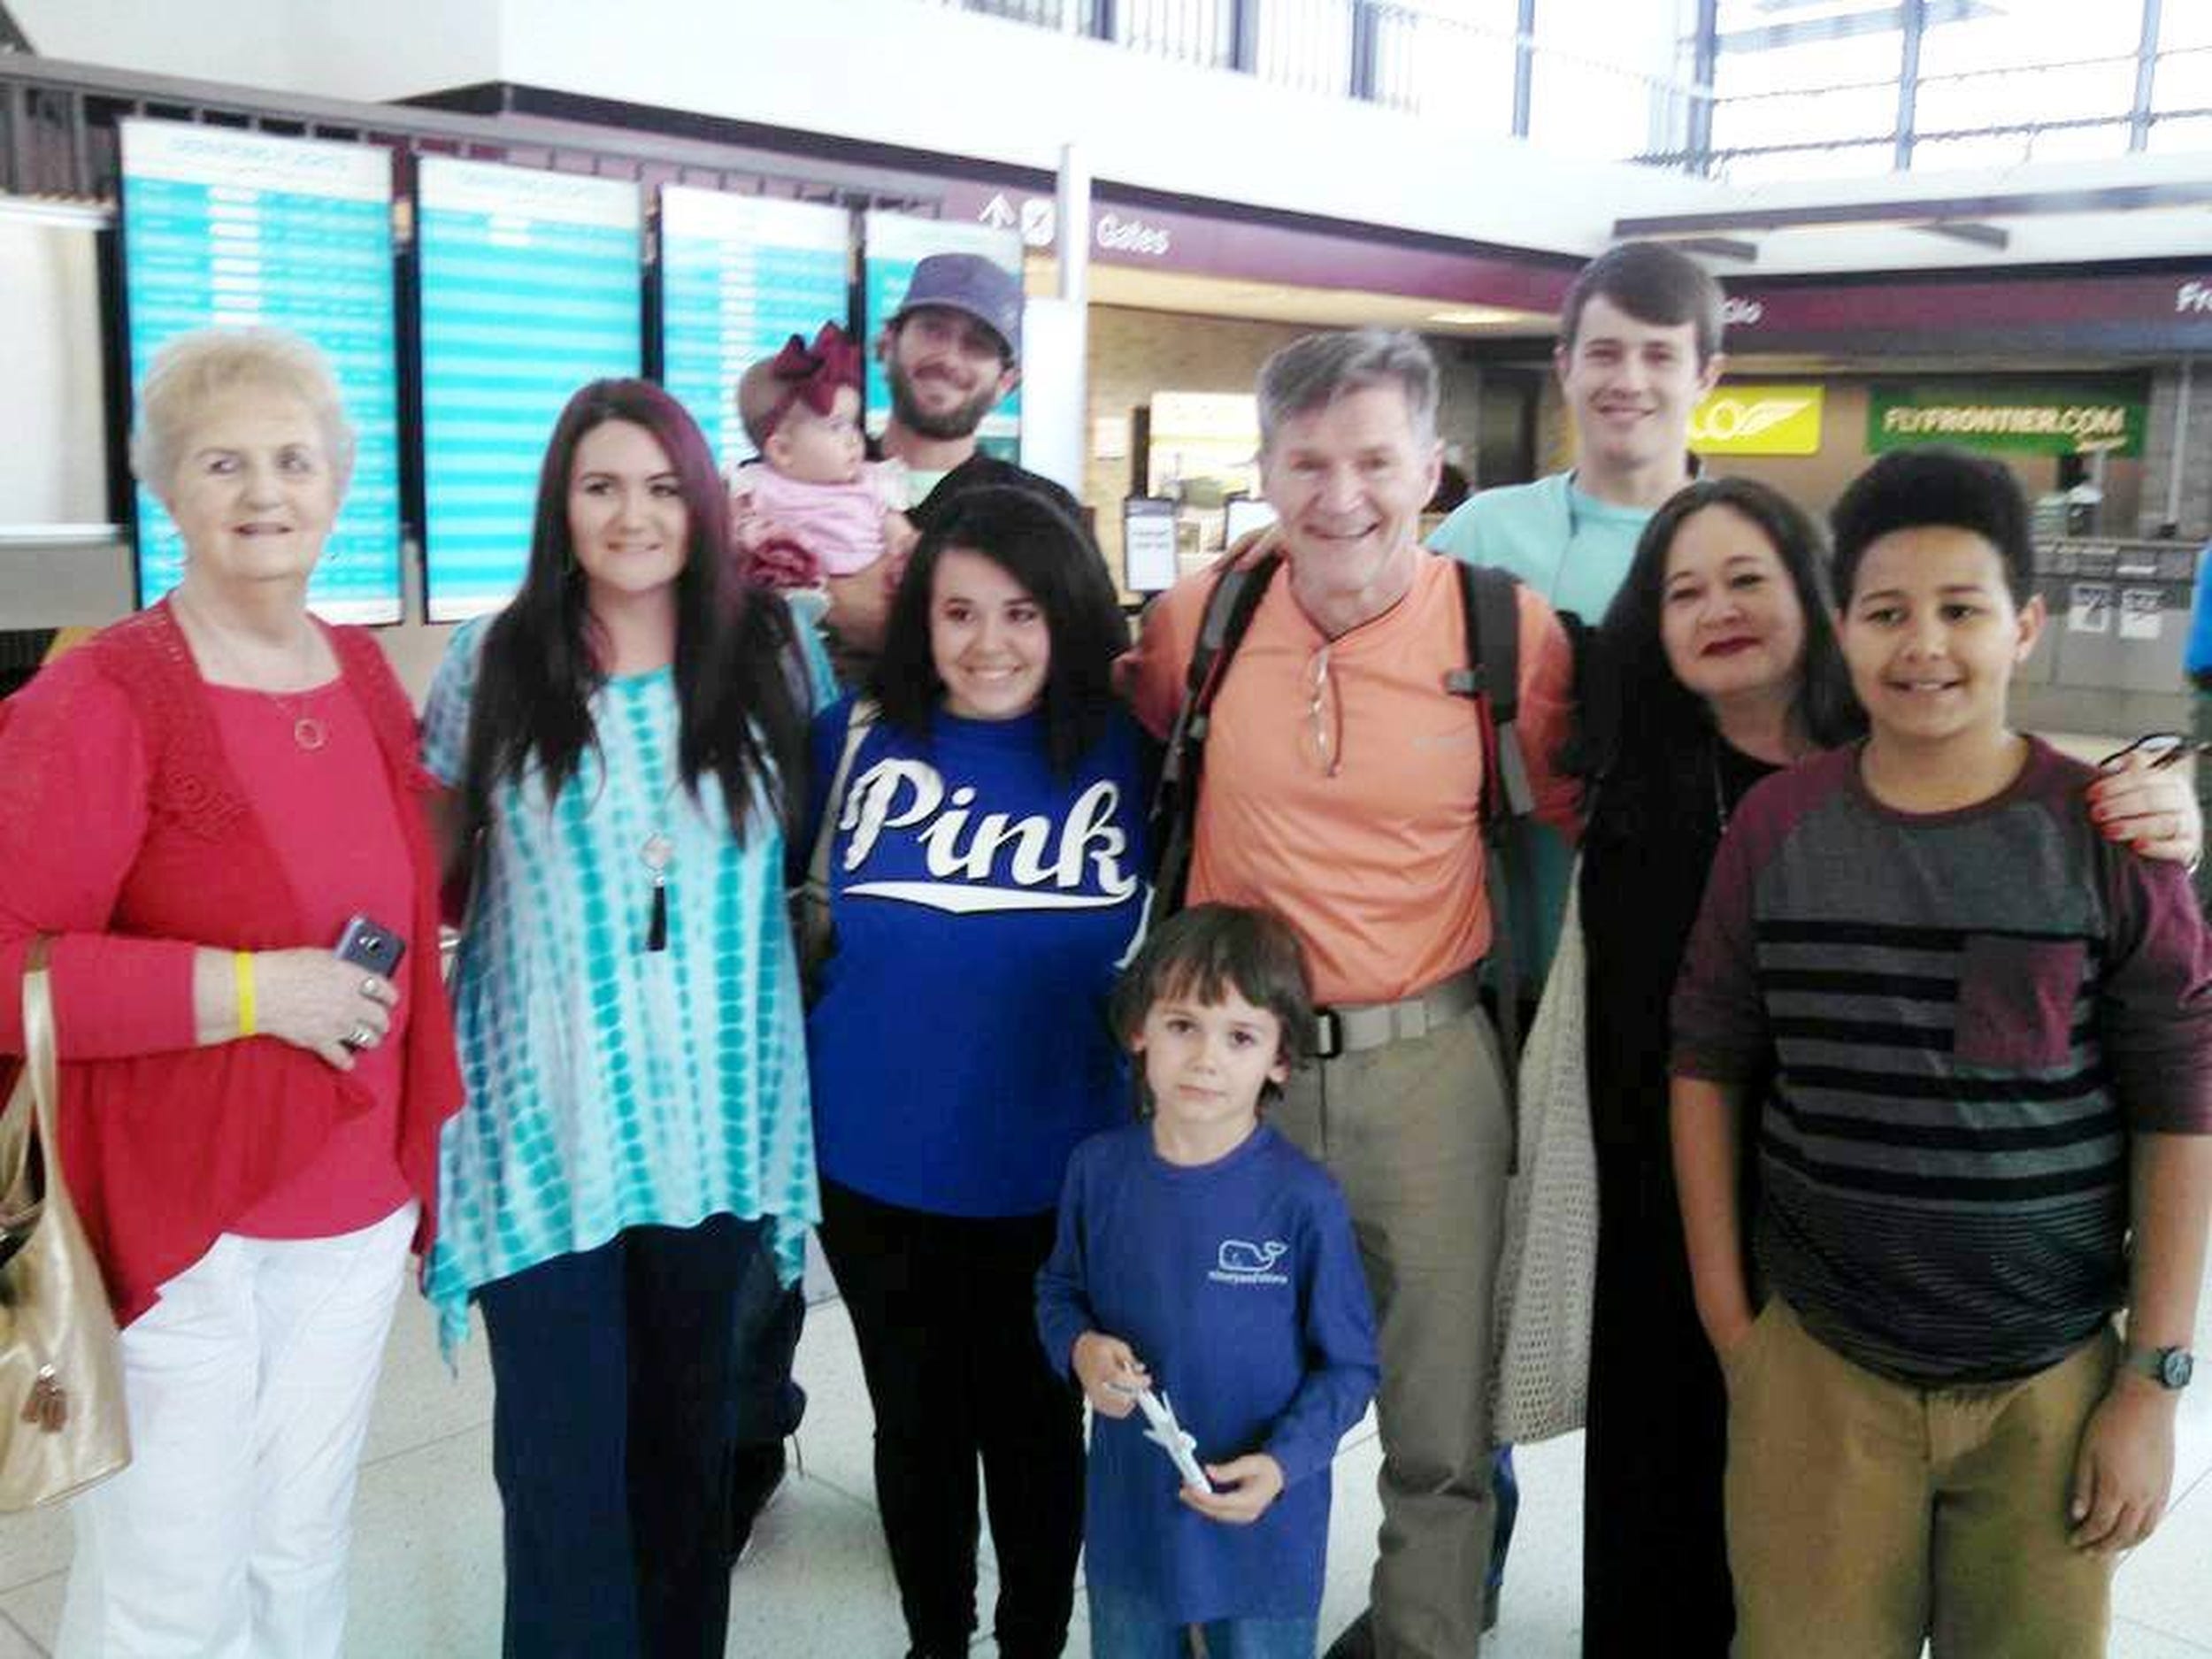 Mark McAlister greets his family for the first time at Memphis International Airport in April 2016 after being held hostage in Yemen for over six months.